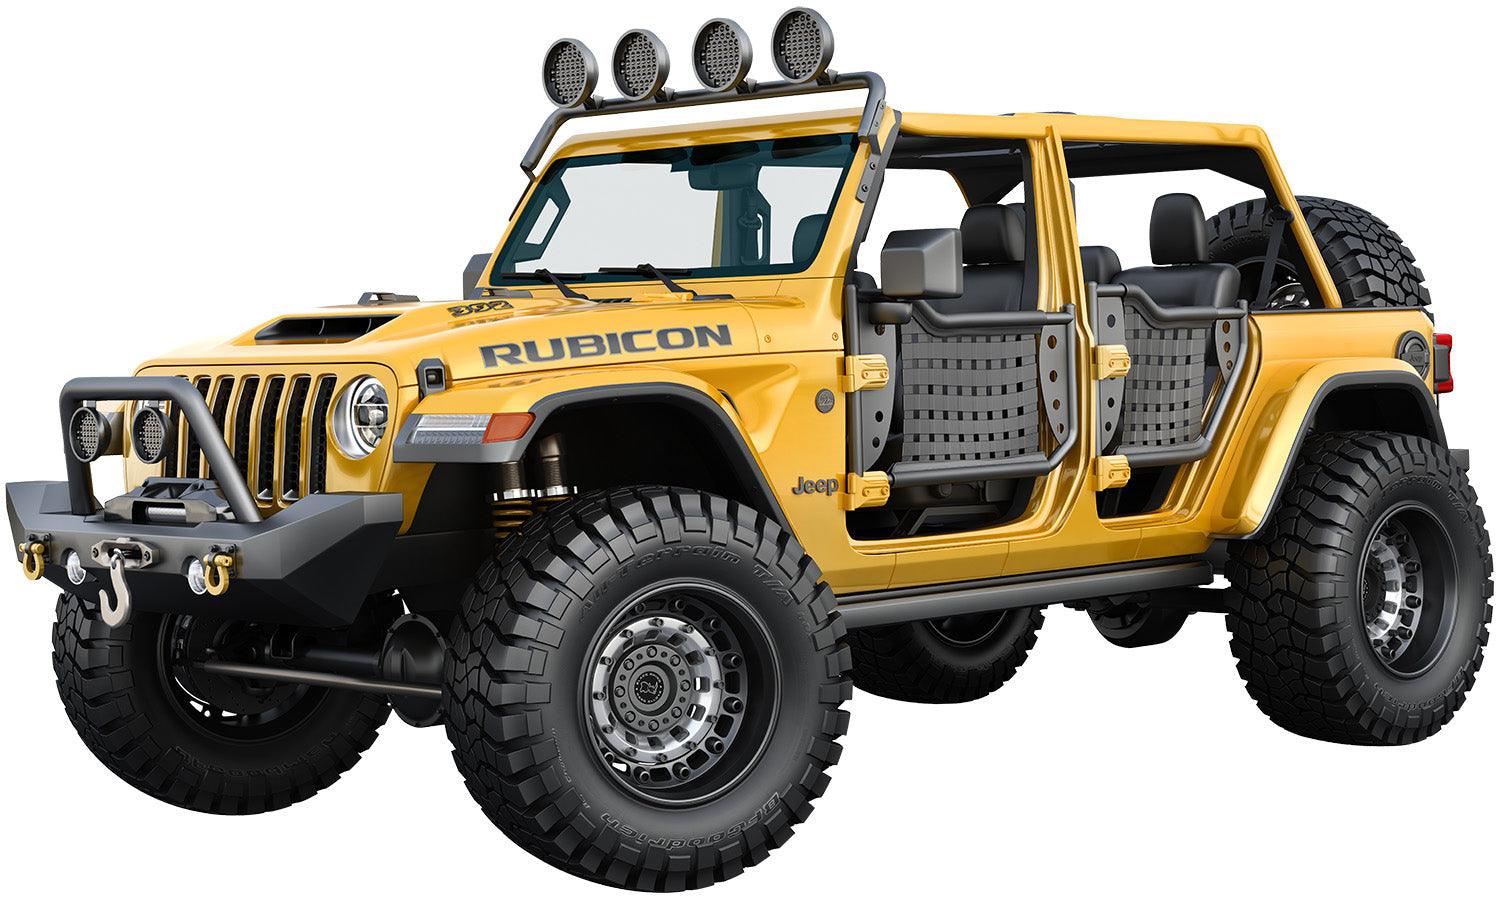 4x4 Jeep Rubicon 391 Multi Colour Removable Peel-N-Stick Wall Decal Sticker 038